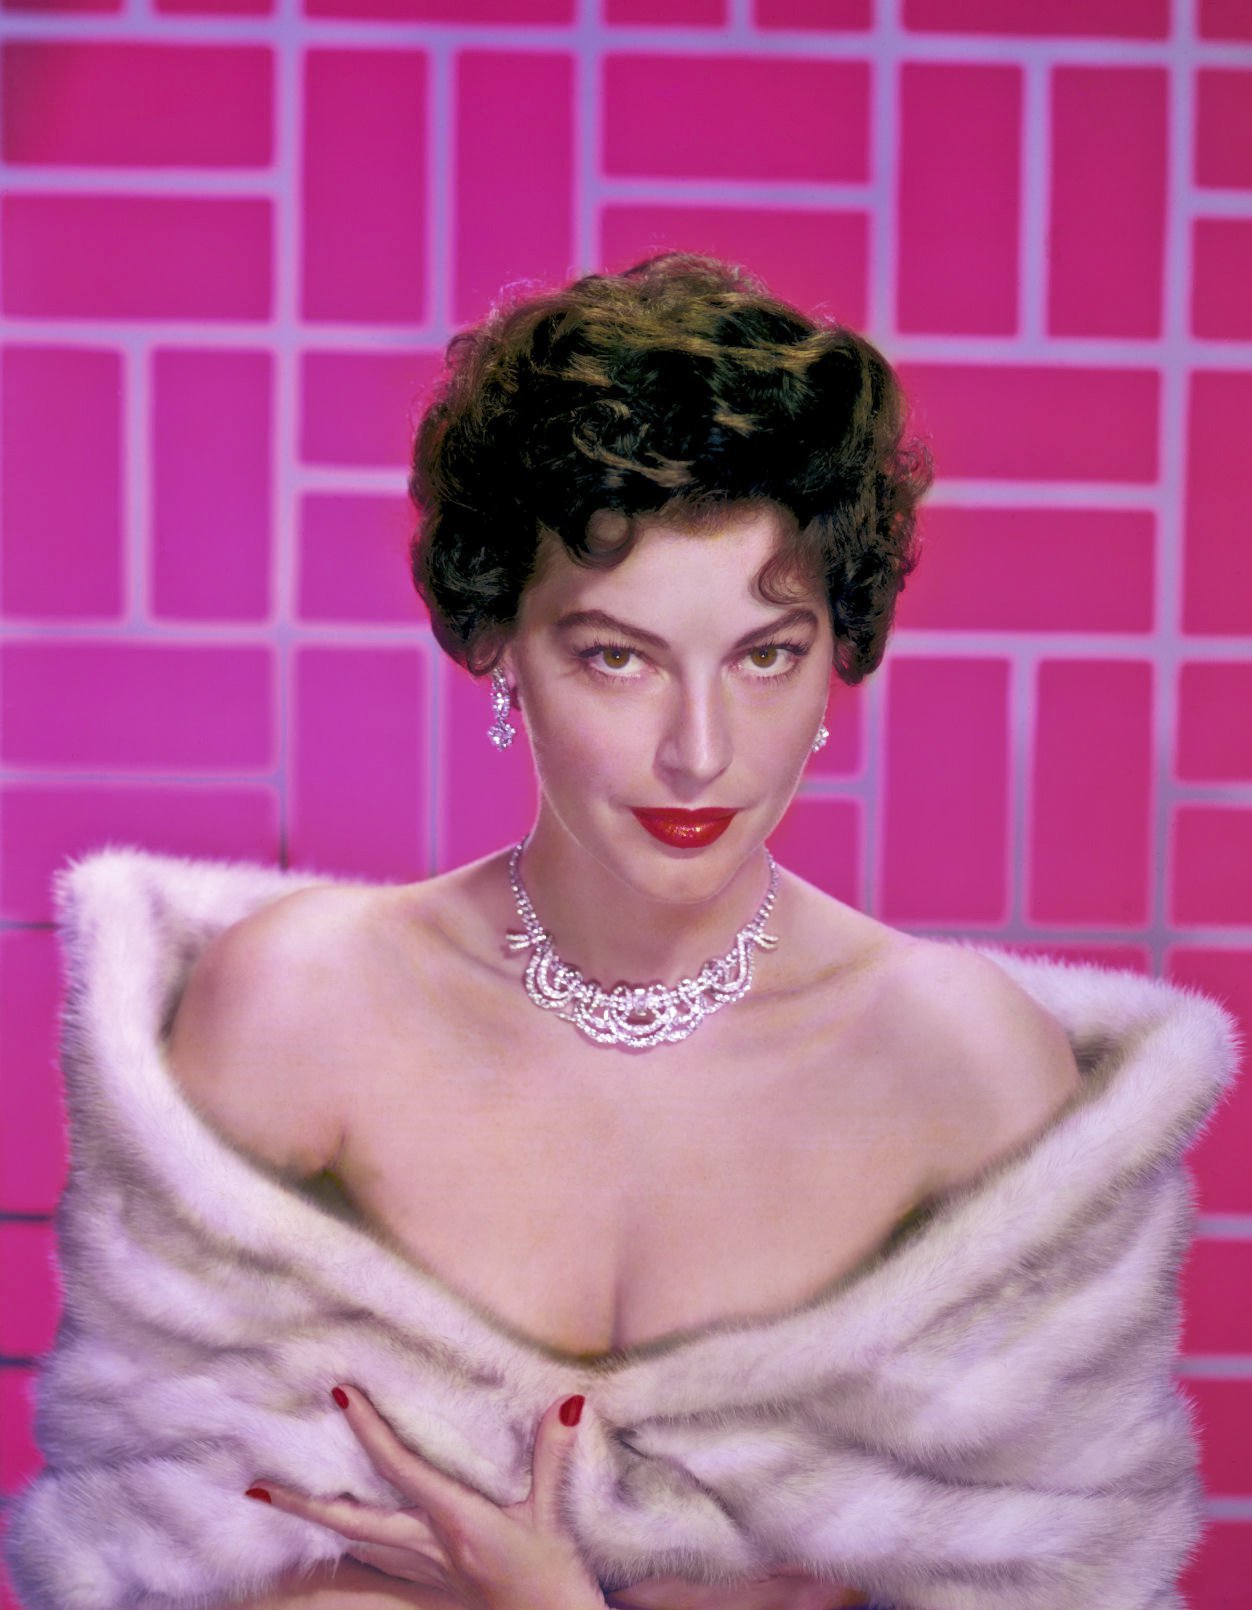 20+ Ava Gardner Photos and Quotes That Make Her an Iconic Old Hollywood